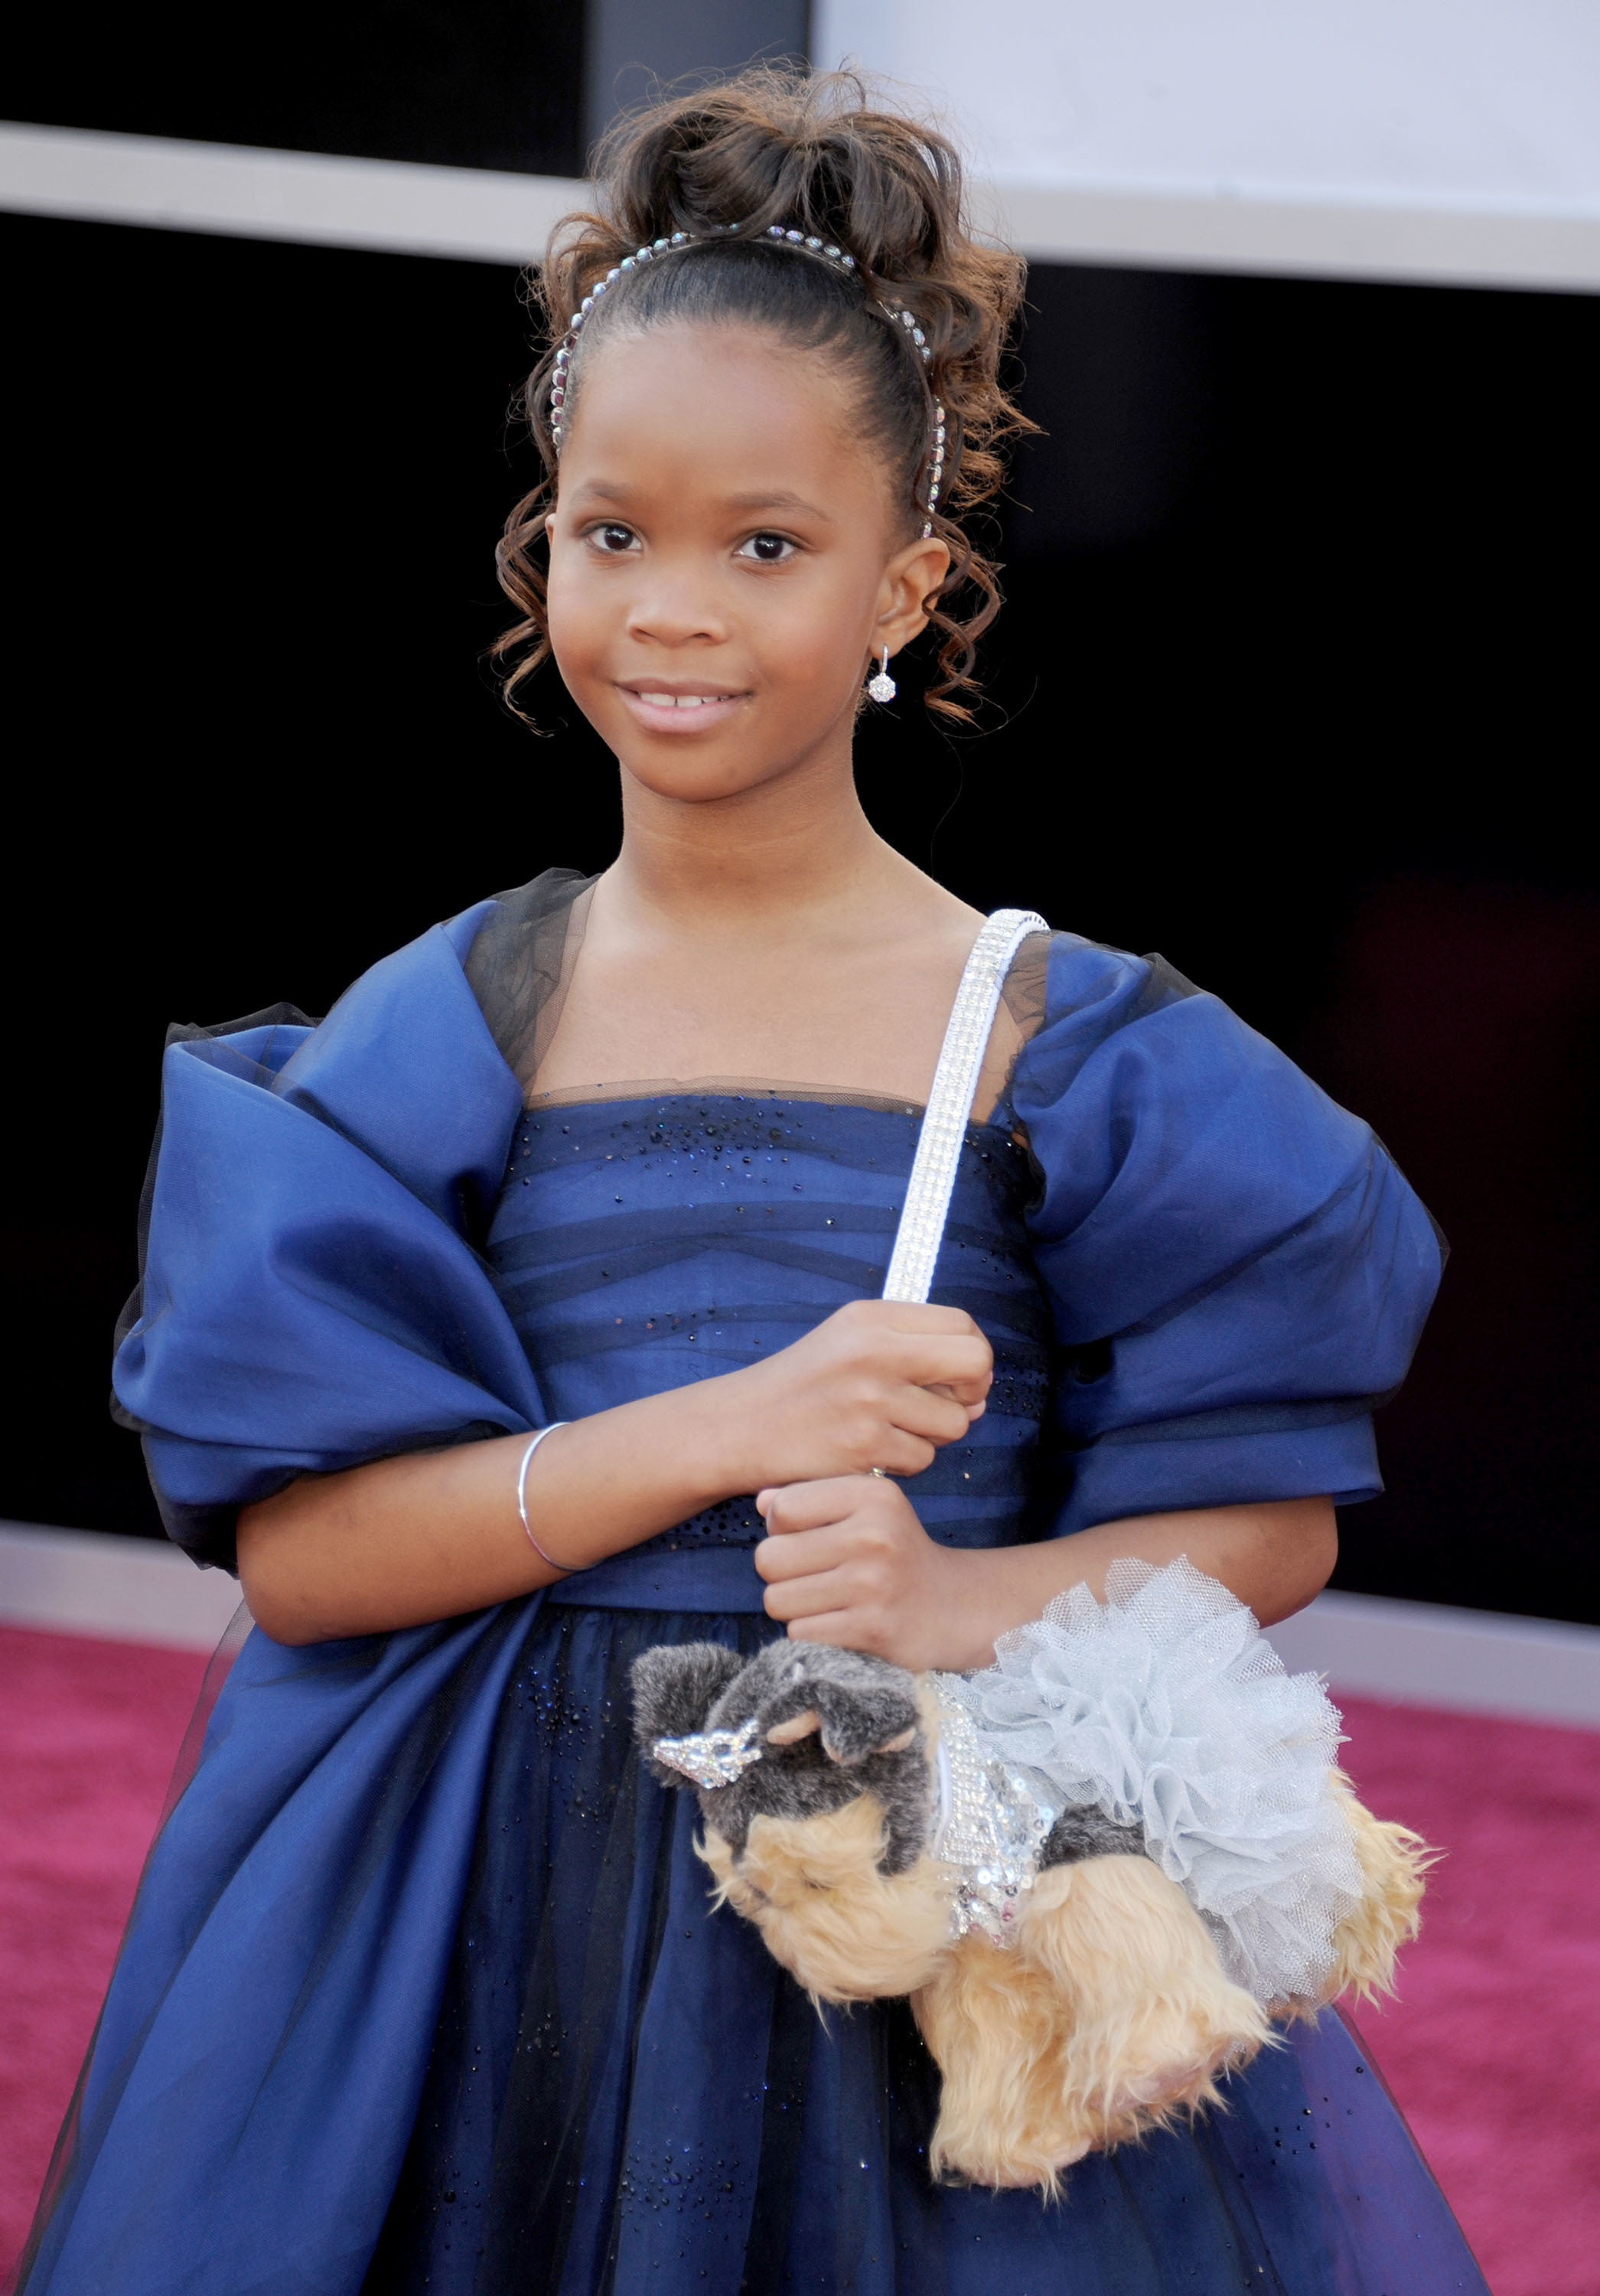 <p>Child actress Quvenzhané Wallis goes down in history as the Oscars' youngest best actress nominee. She was 9 when she received the nod for her performance in "Beasts of the Southern Wild."</p>